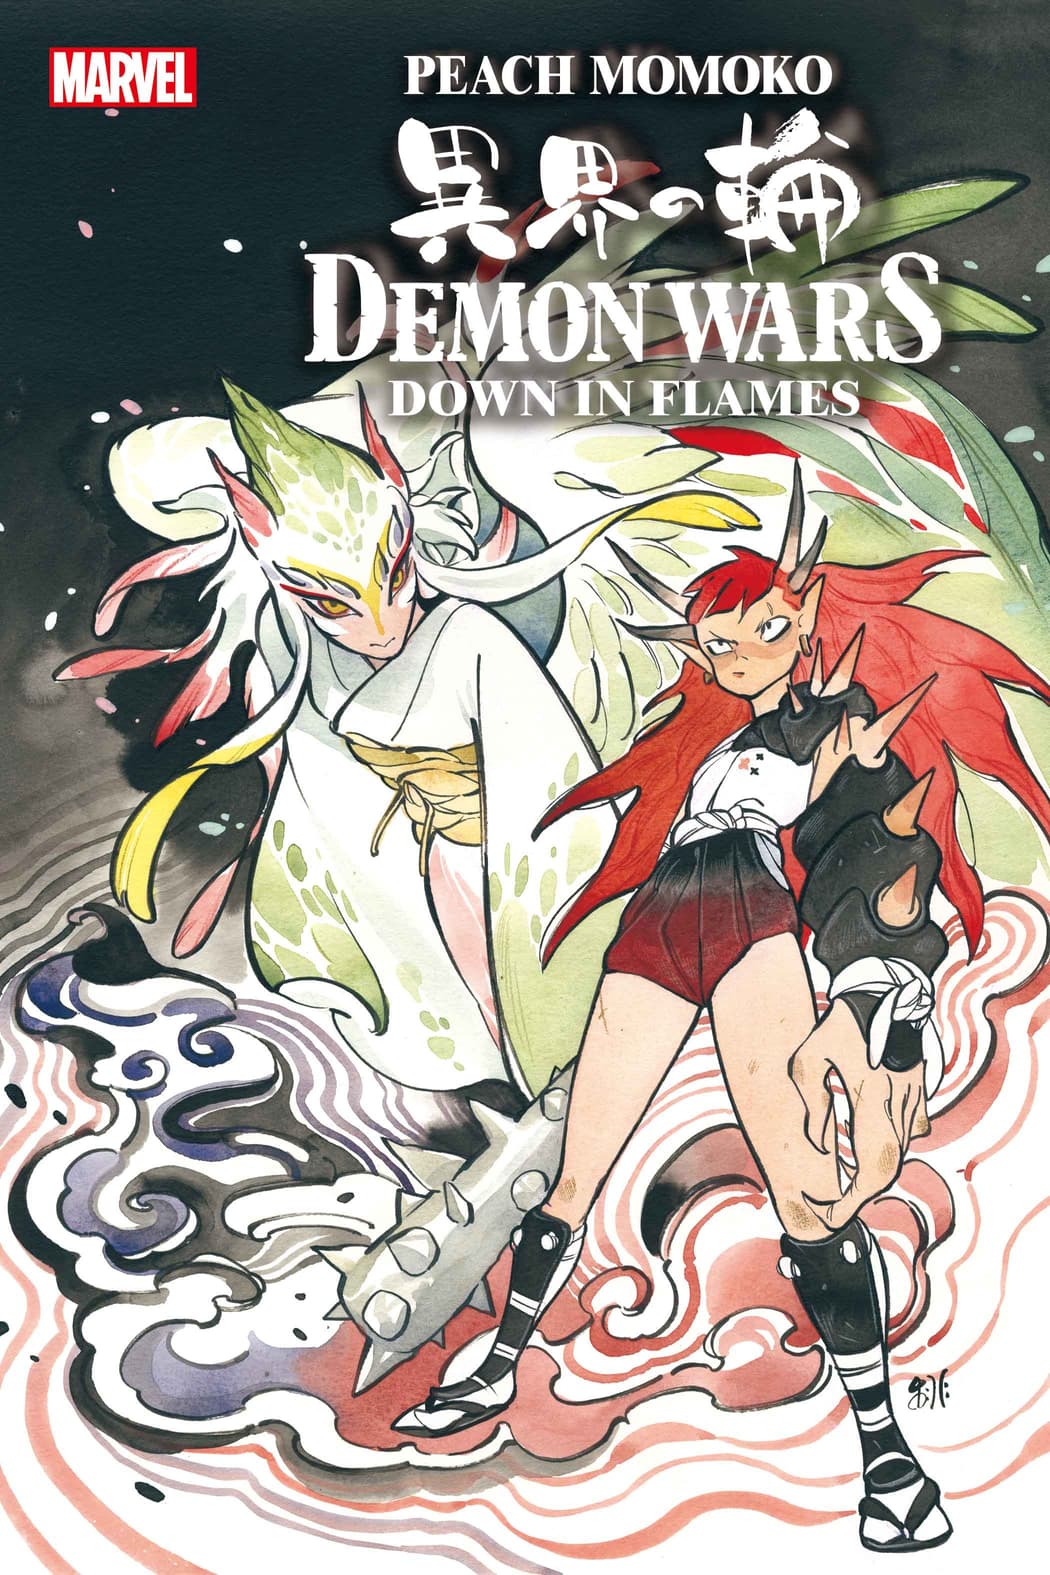 DEMON WARS: DOWN IN FLAMES #1 Art and Cover by PEACH MOMOKO